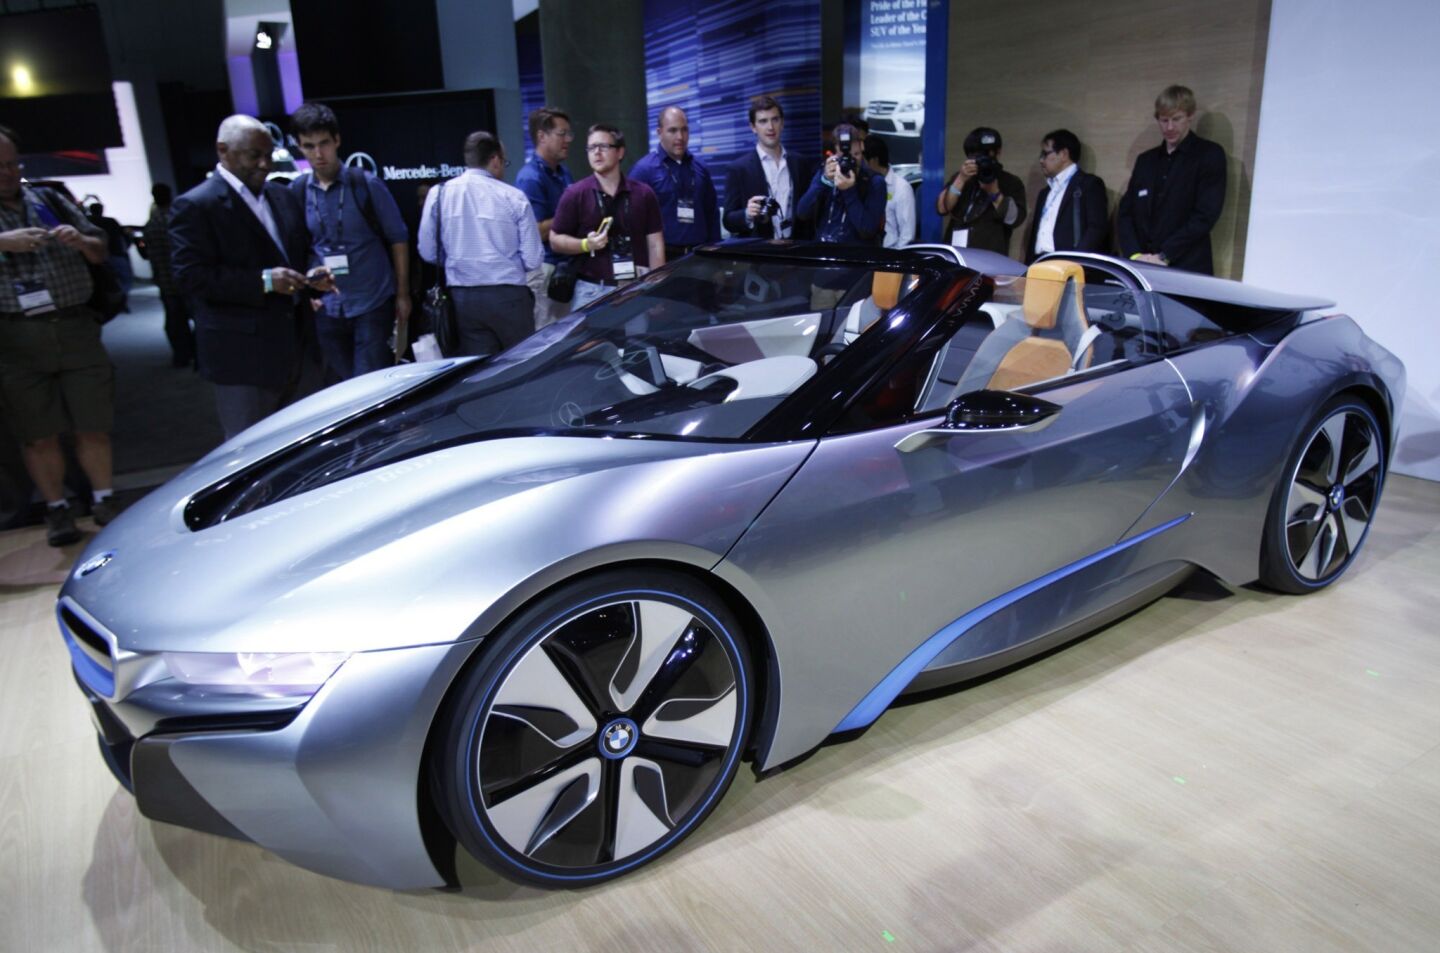 The BMW i8 convertible is introduced at the show.